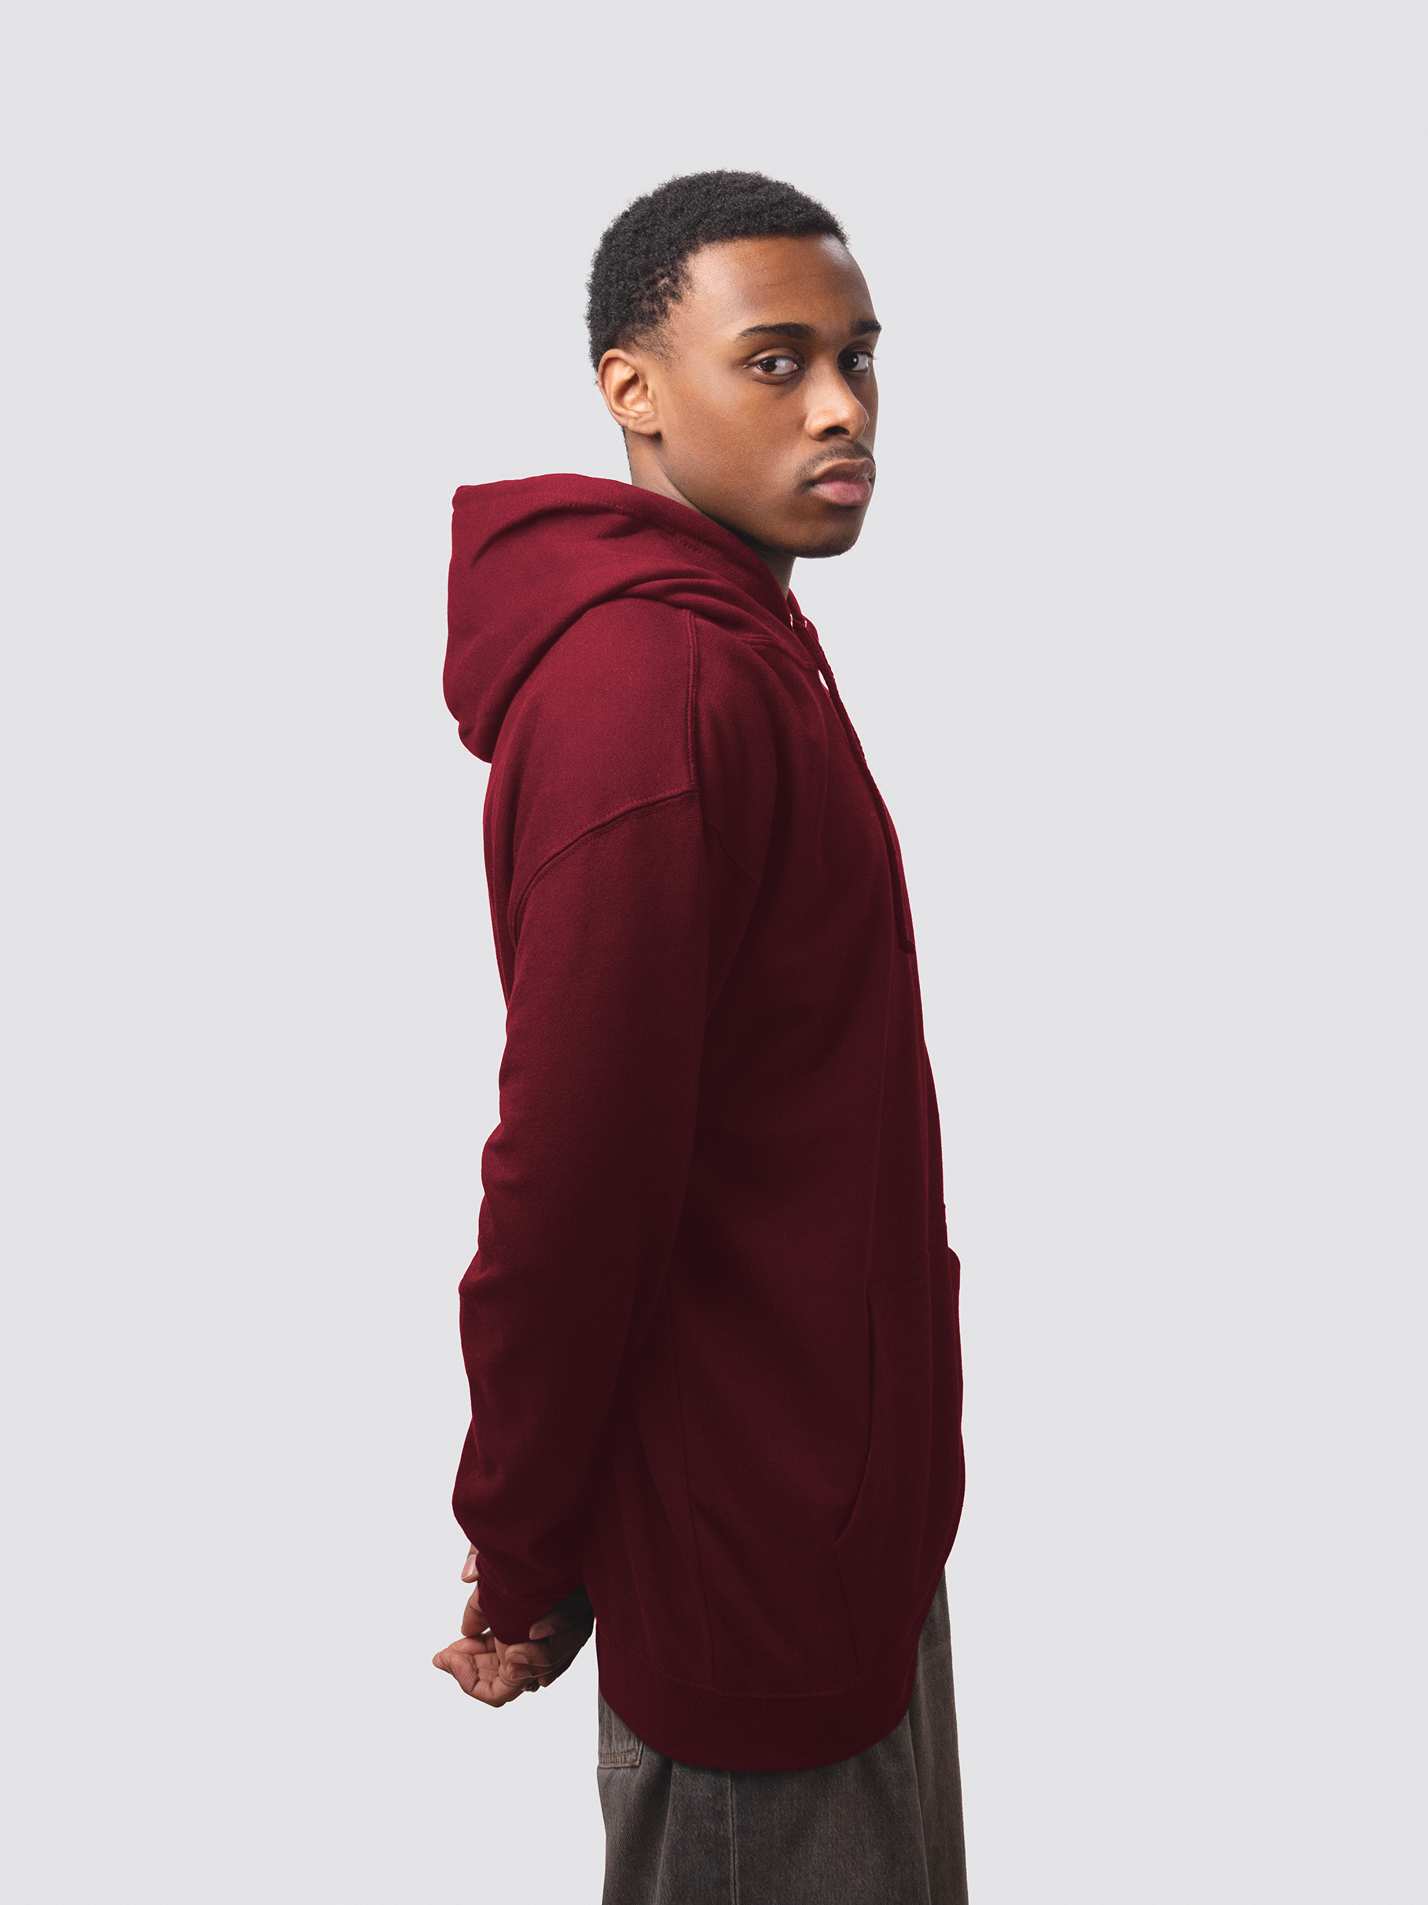 Green Templeton College hoodie, made from burgundy cotton-faced fabric